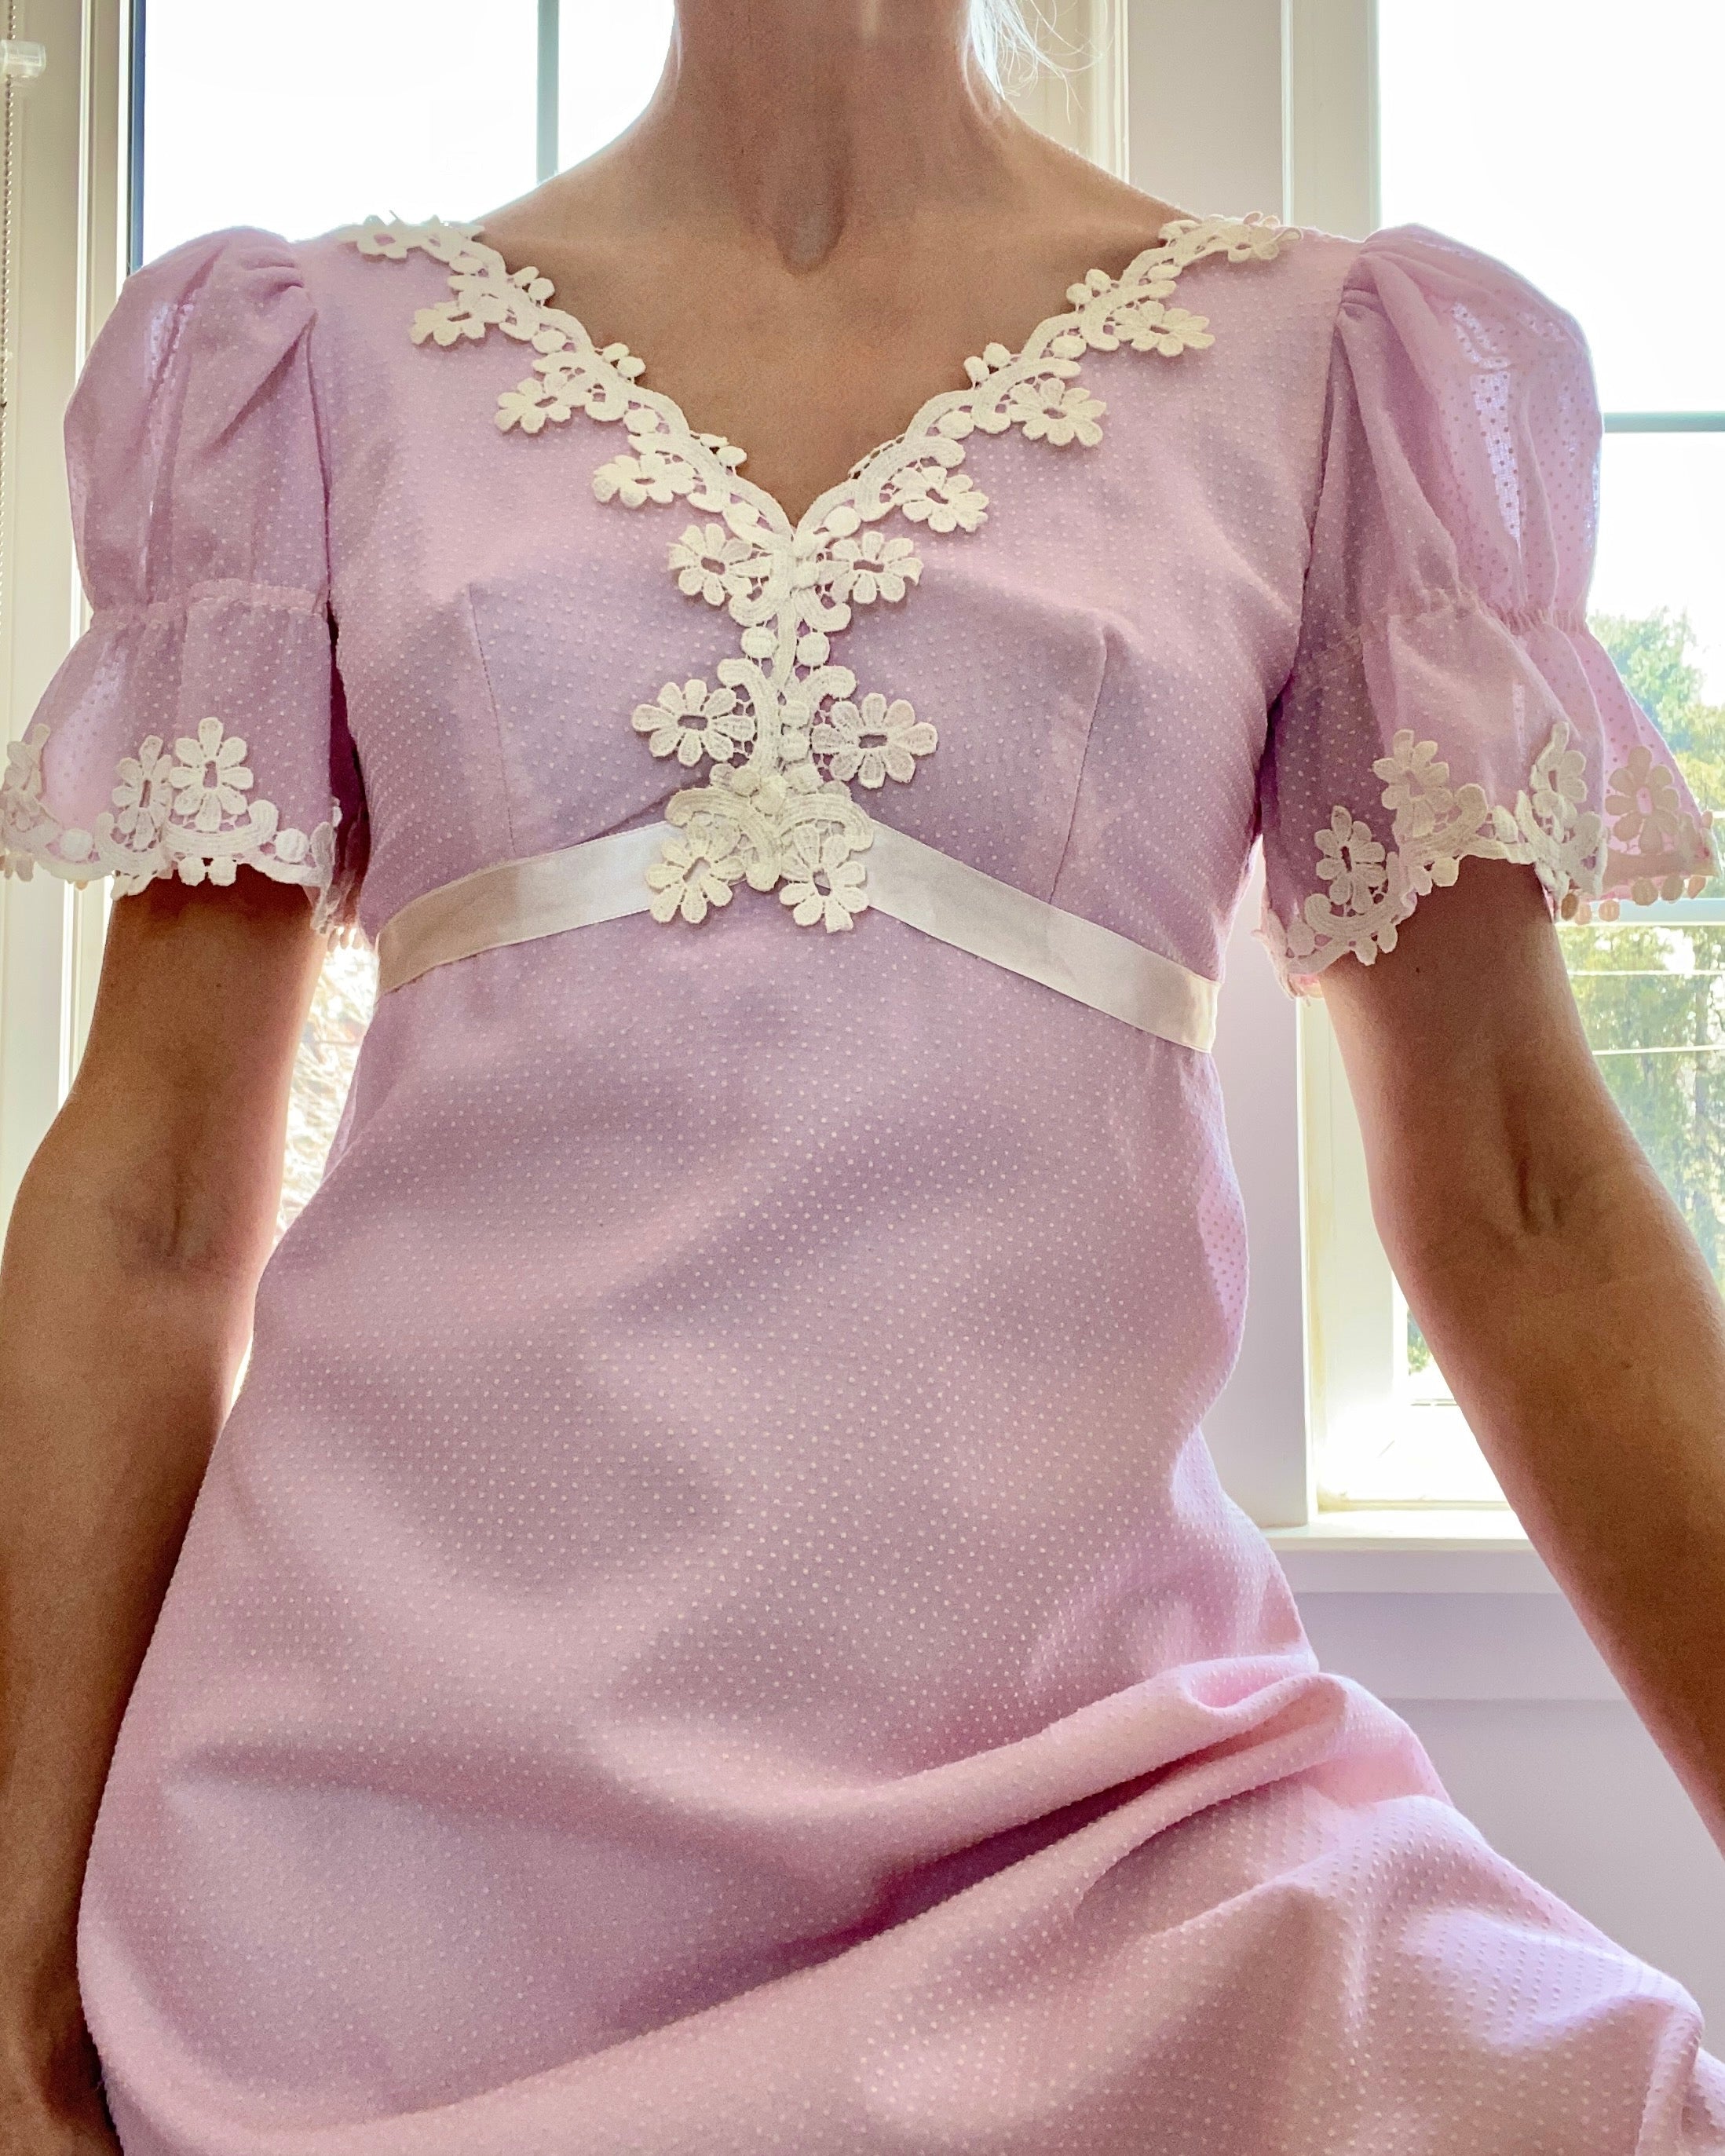 Vintage 1970s Pink Voile Swiss Dot and Lace Victorian Inspired Dress XS or S